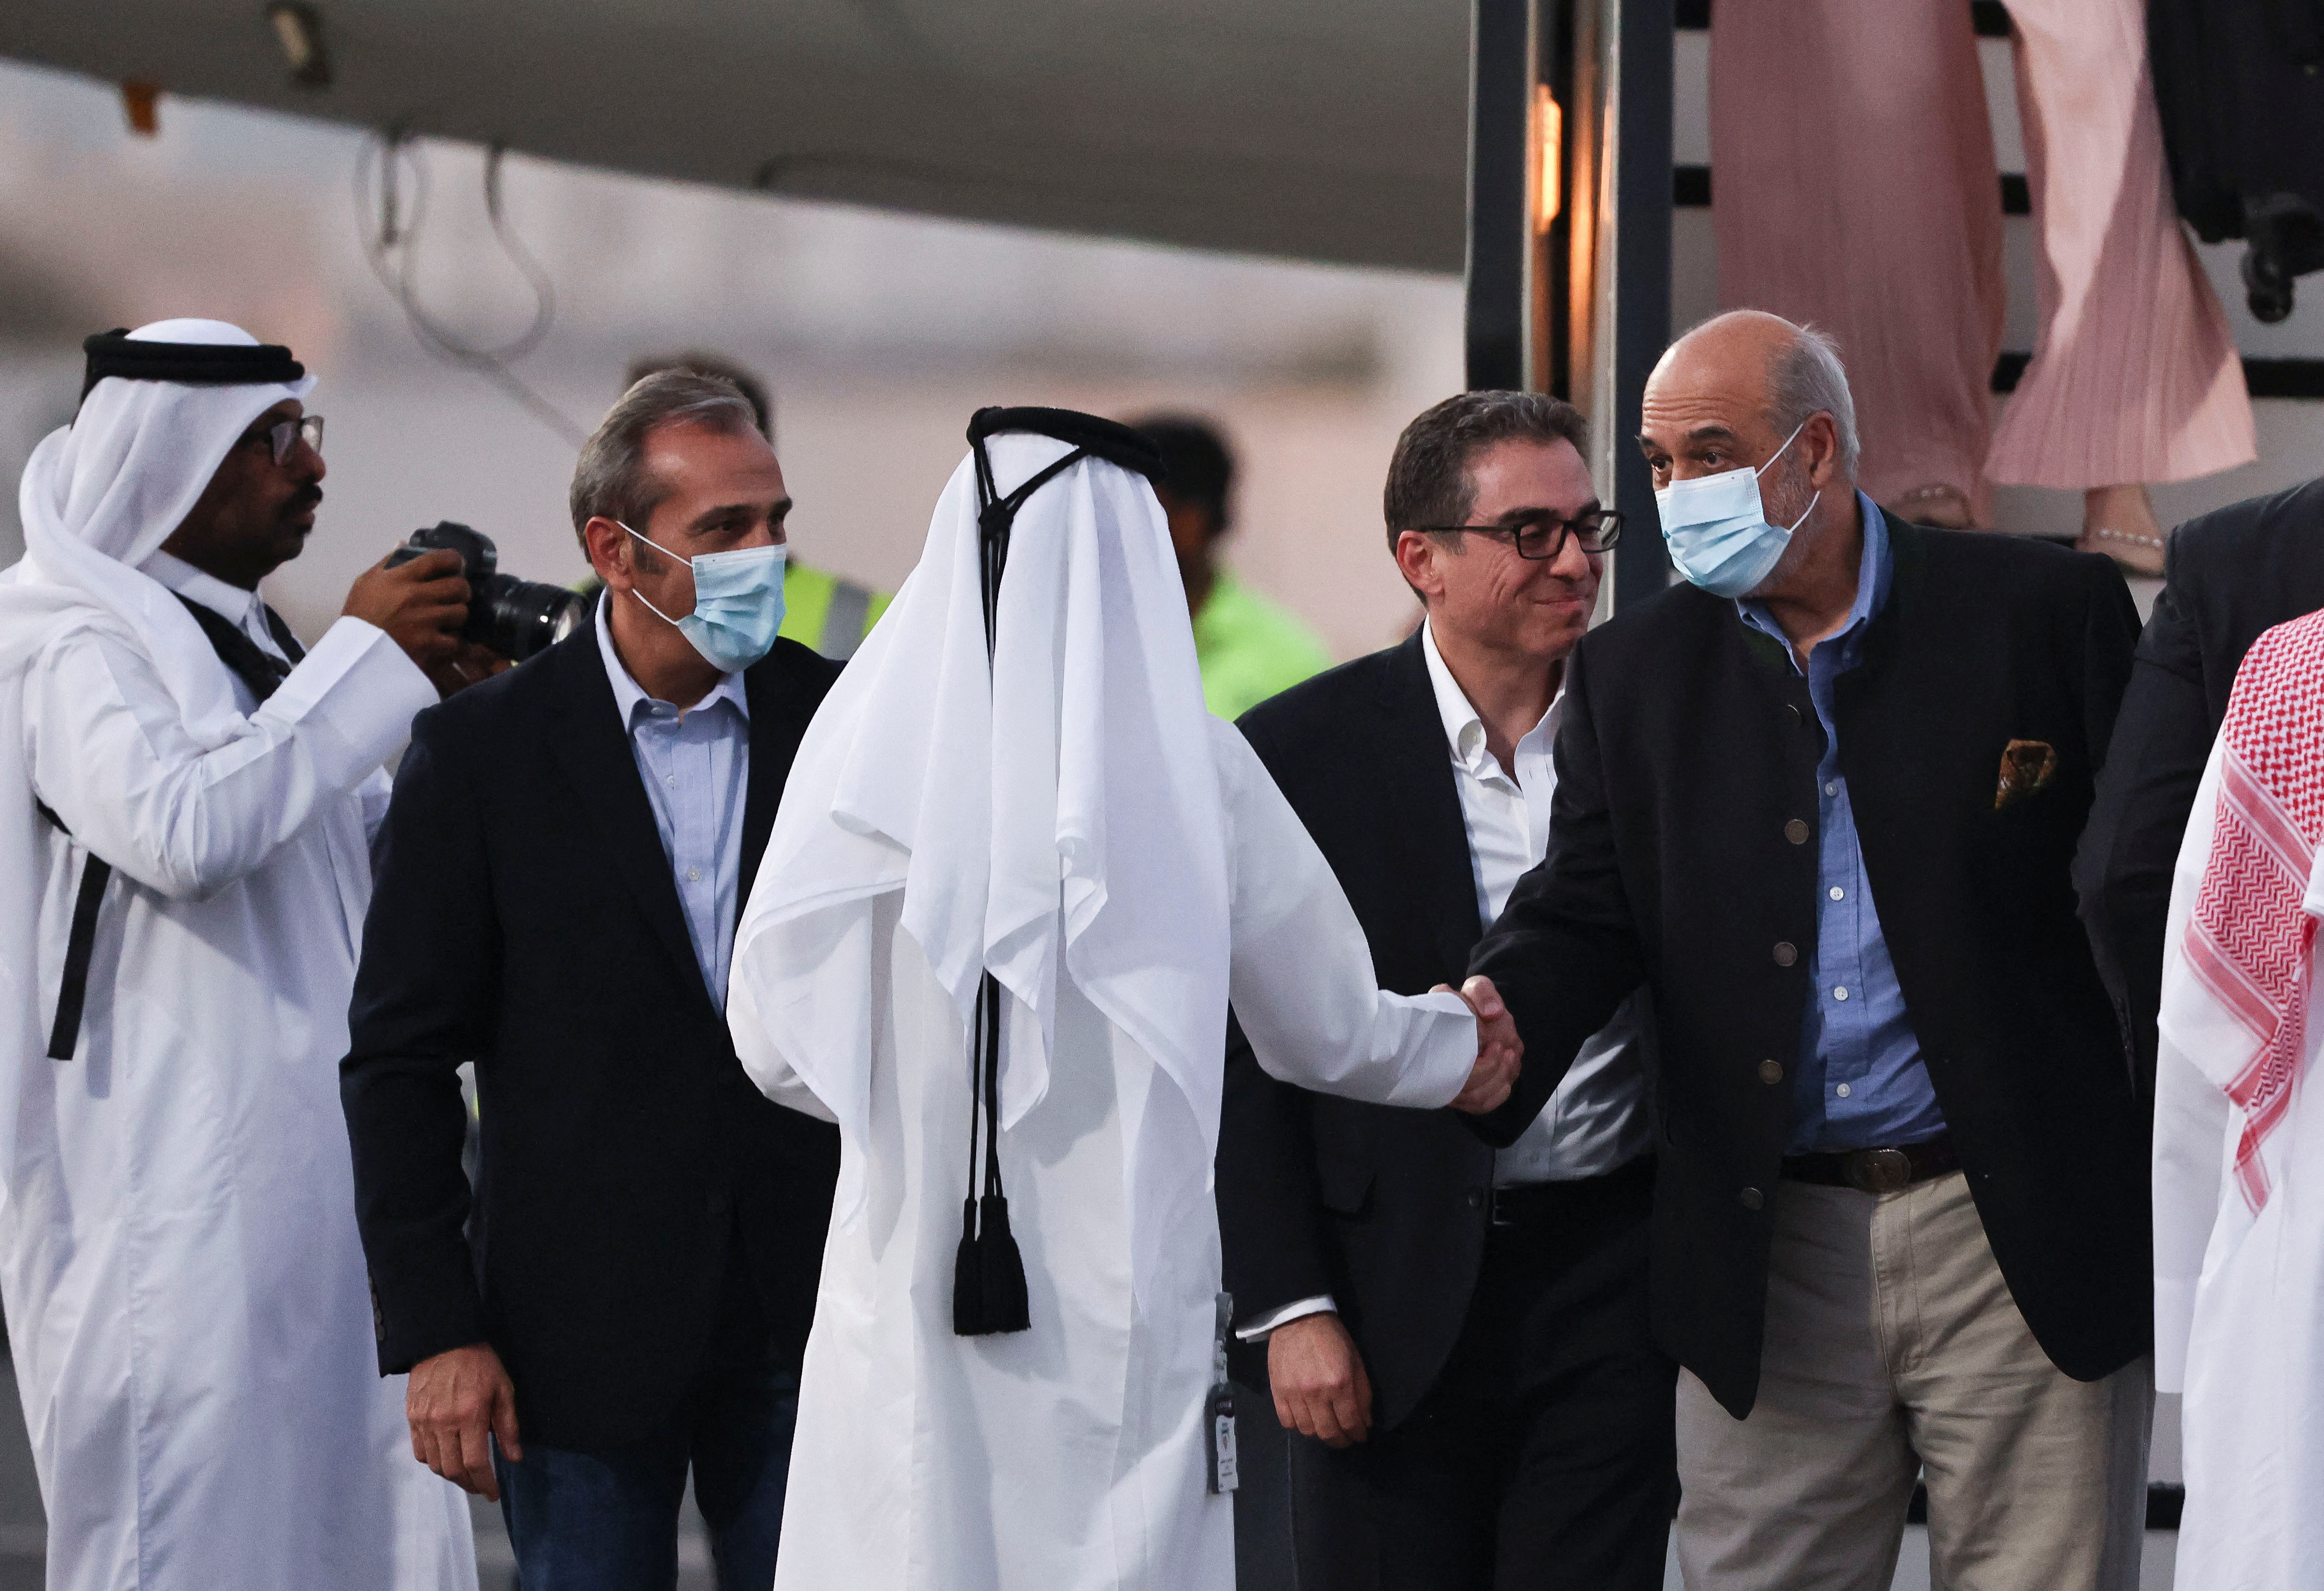 Americans released in a swap deal between the U.S. and Iran arrive in Doha